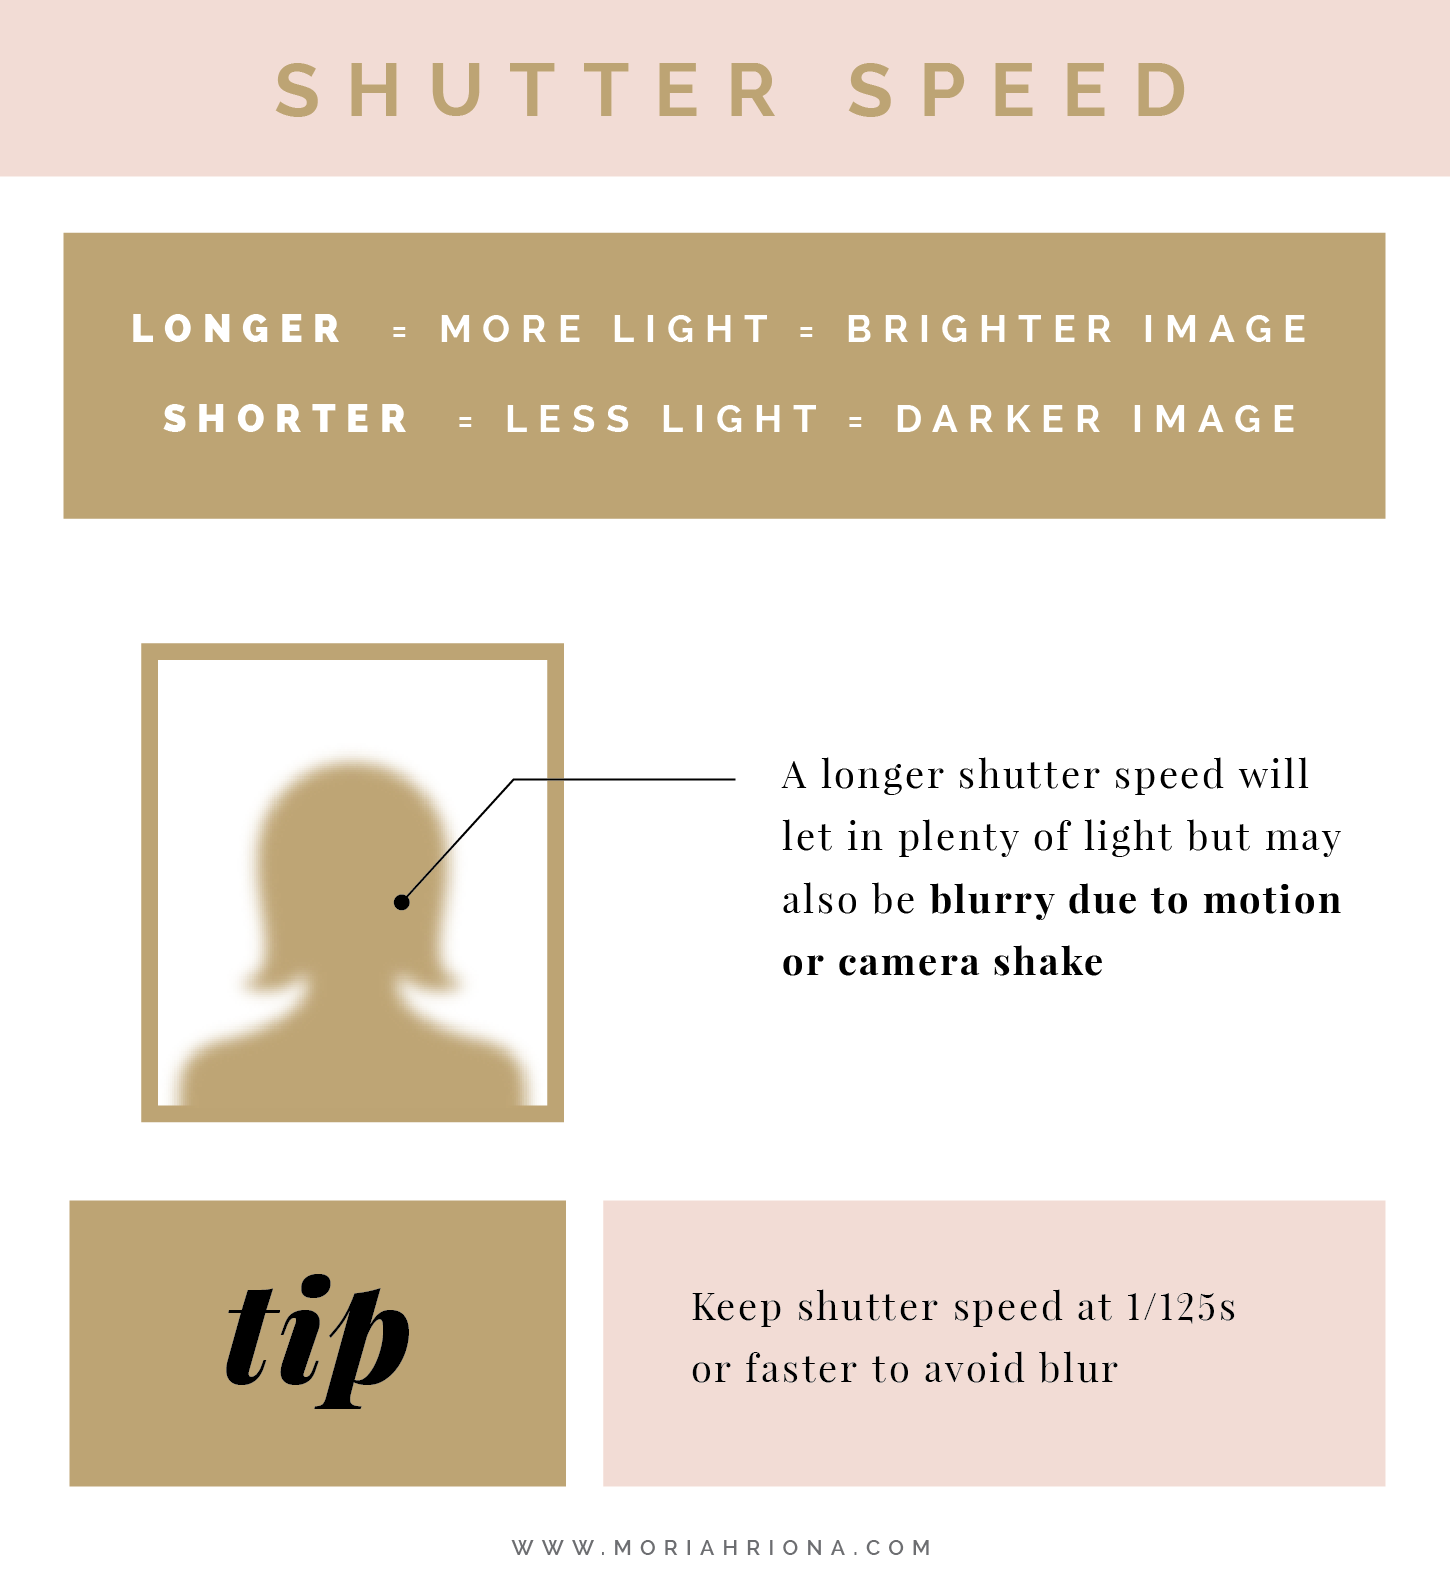 The Ultimate Guide to Shooting in Manual Mode for Beginner Photographers. A flash card and cheat sheet for understanding shutter speed.